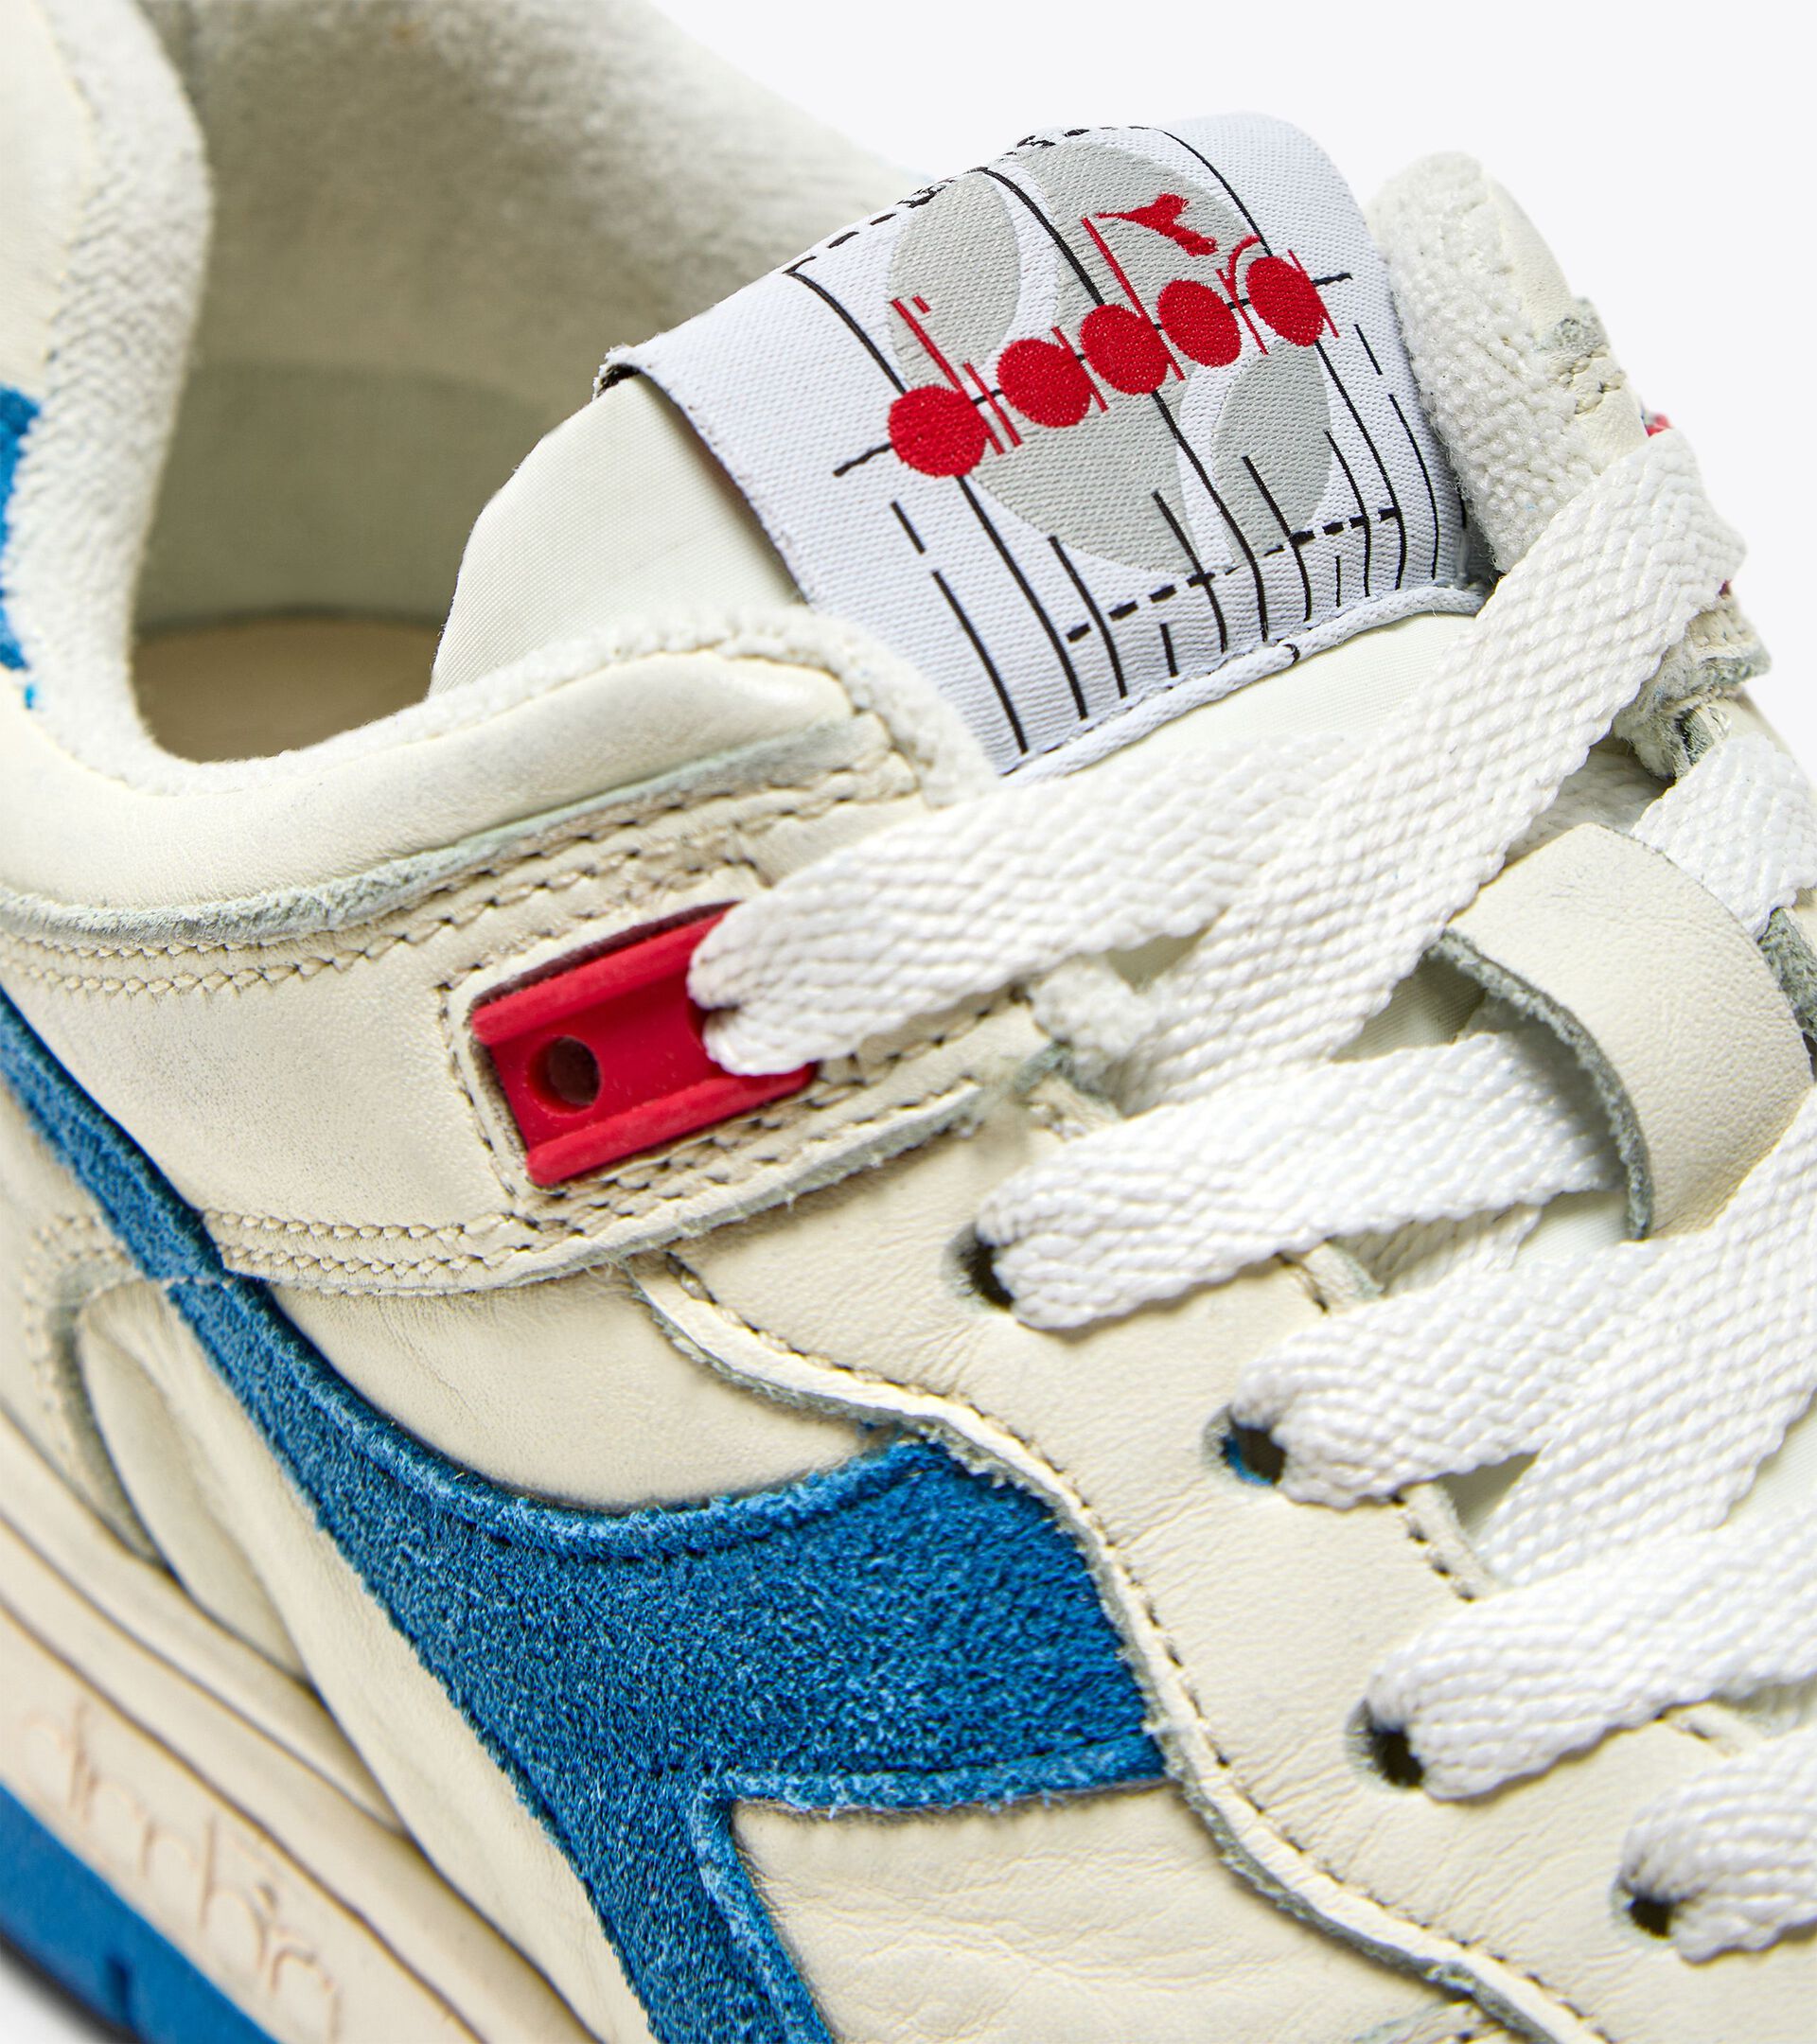 Heritage shoe - Made In Italy - Gender Neutral B.560 USED LEGACY ITALIA BUTTER WHITE - Diadora